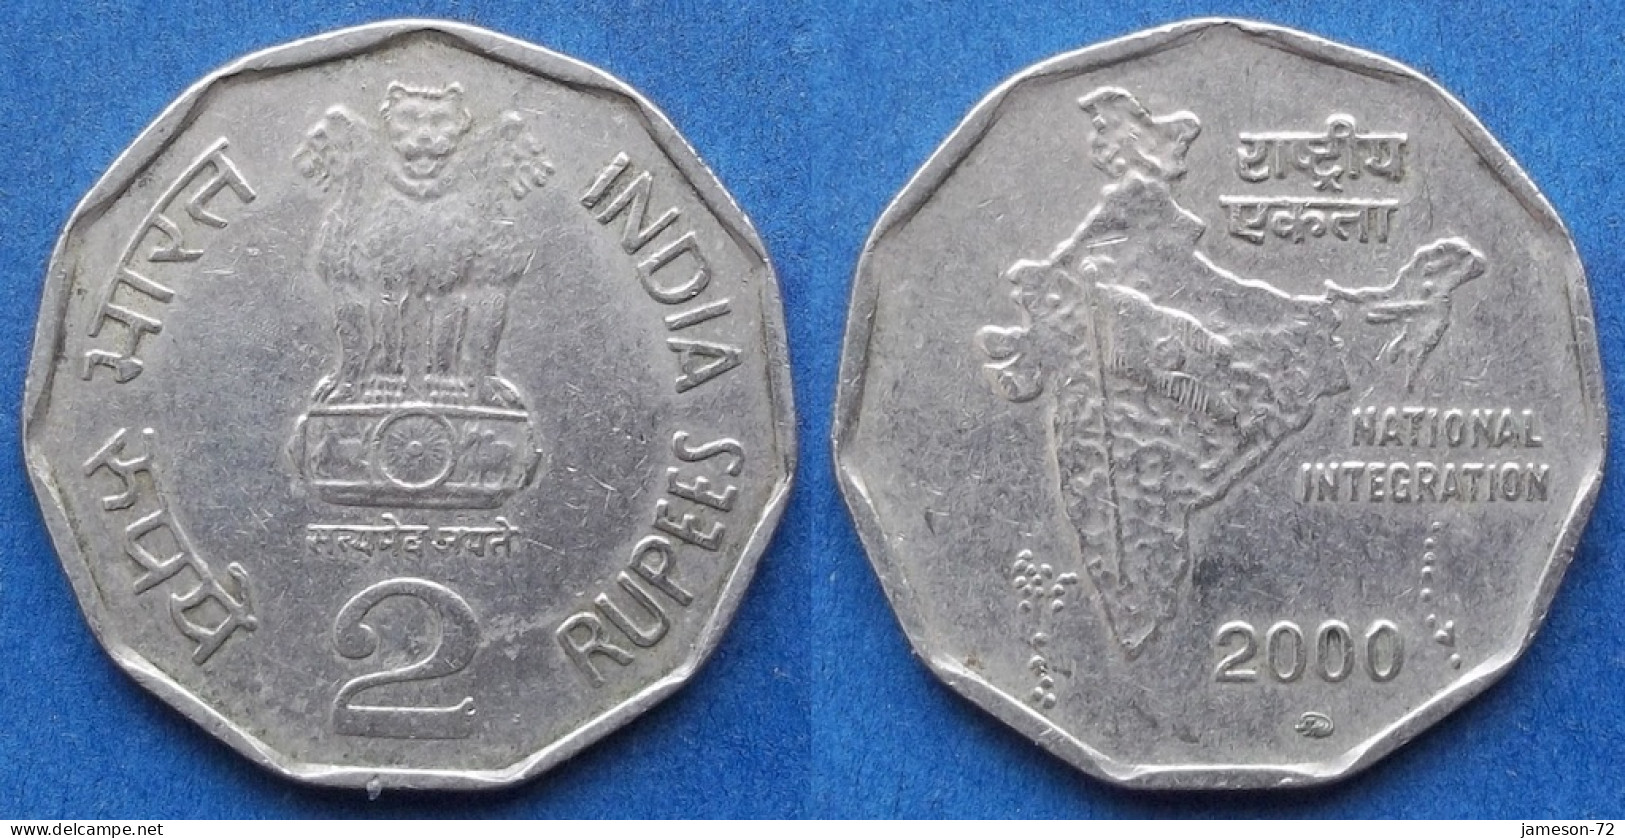 INDIA - 2 Rupees 2000 "Flag On Map" KM# 121.5 Republic Decimal Coinage (1957) - Edelweiss Coins - Géorgie